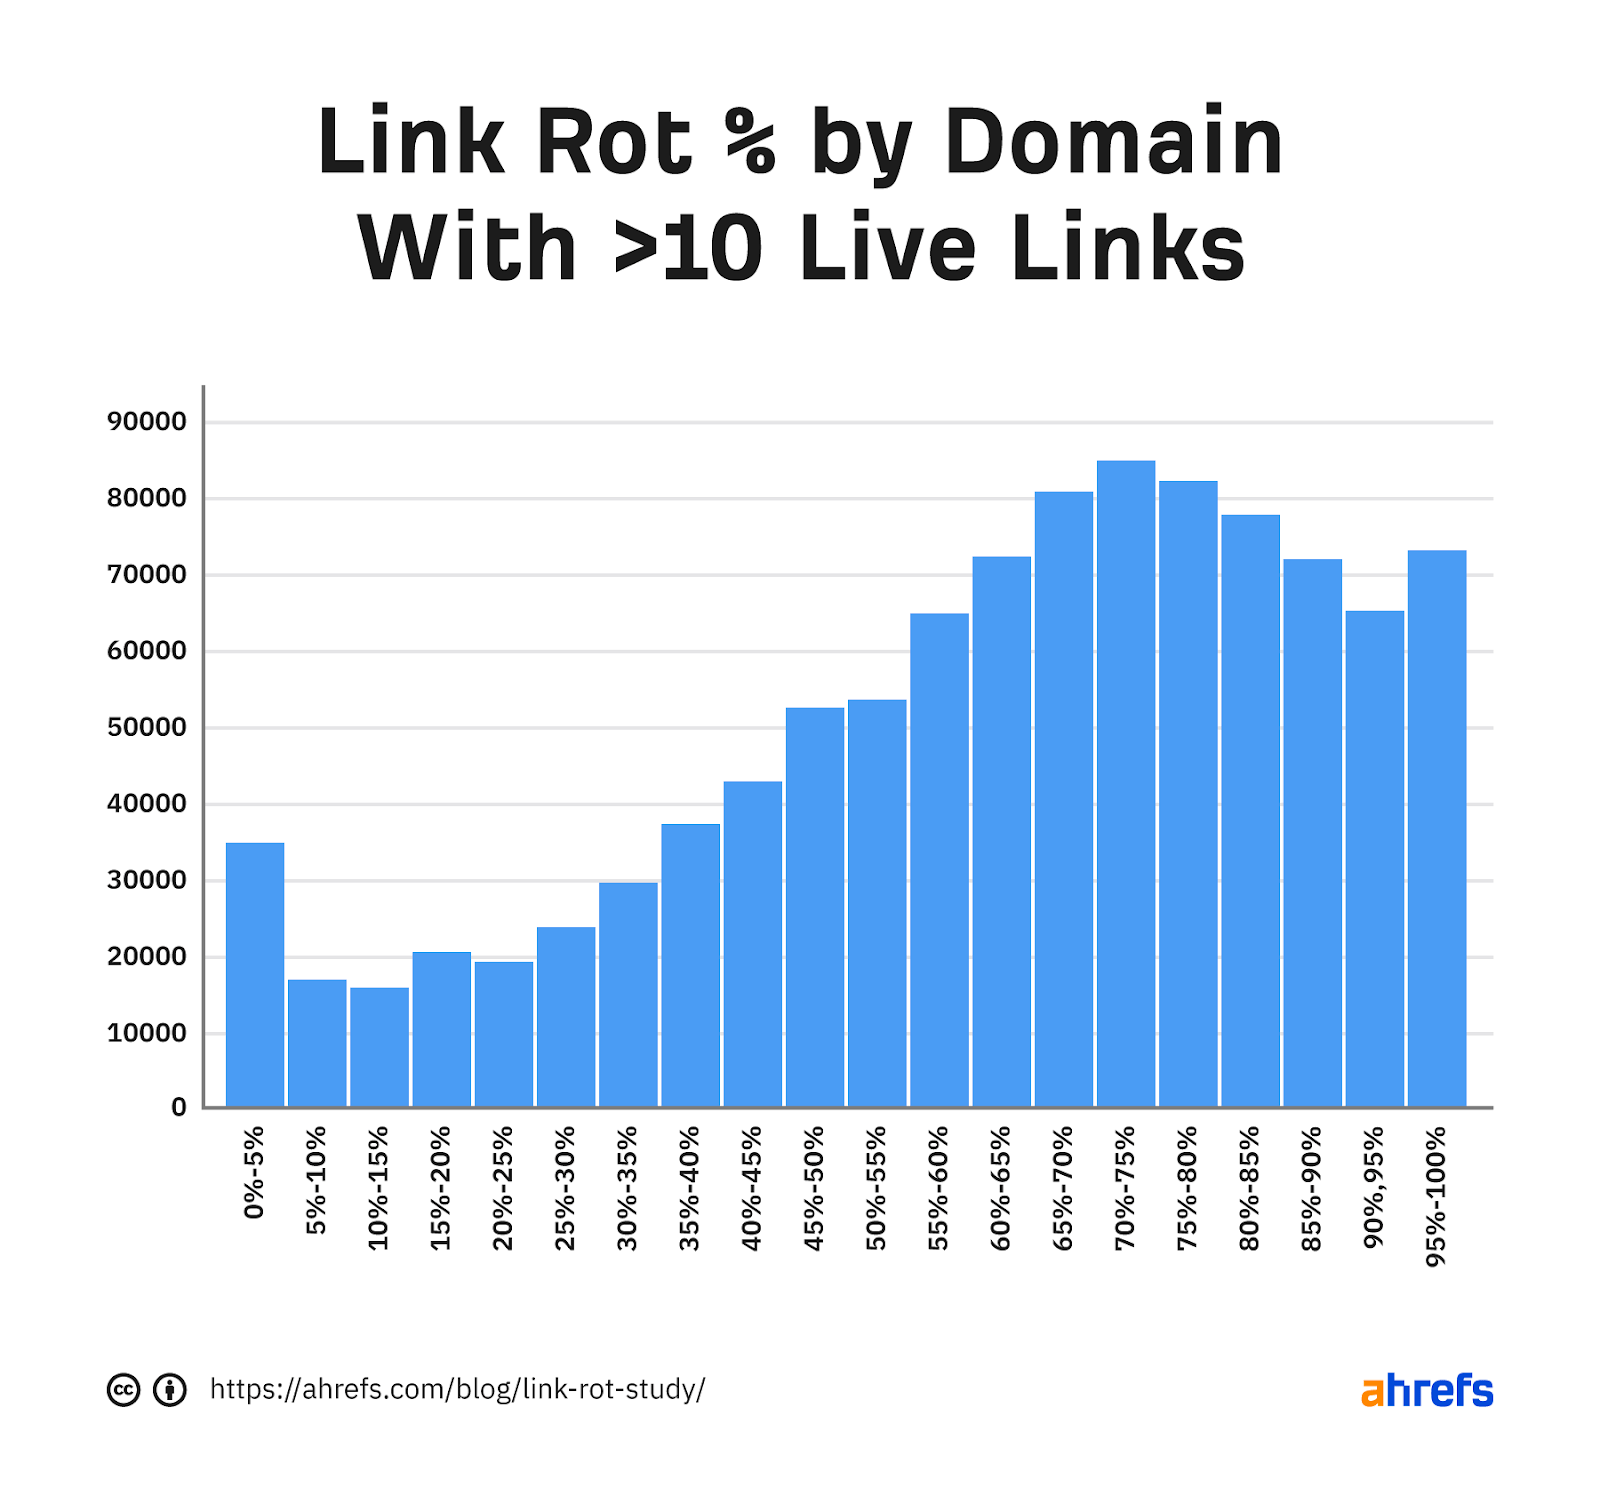 Histogram showing the link rot percentage that occurs by number of domains, filtered to greater than 10 live links